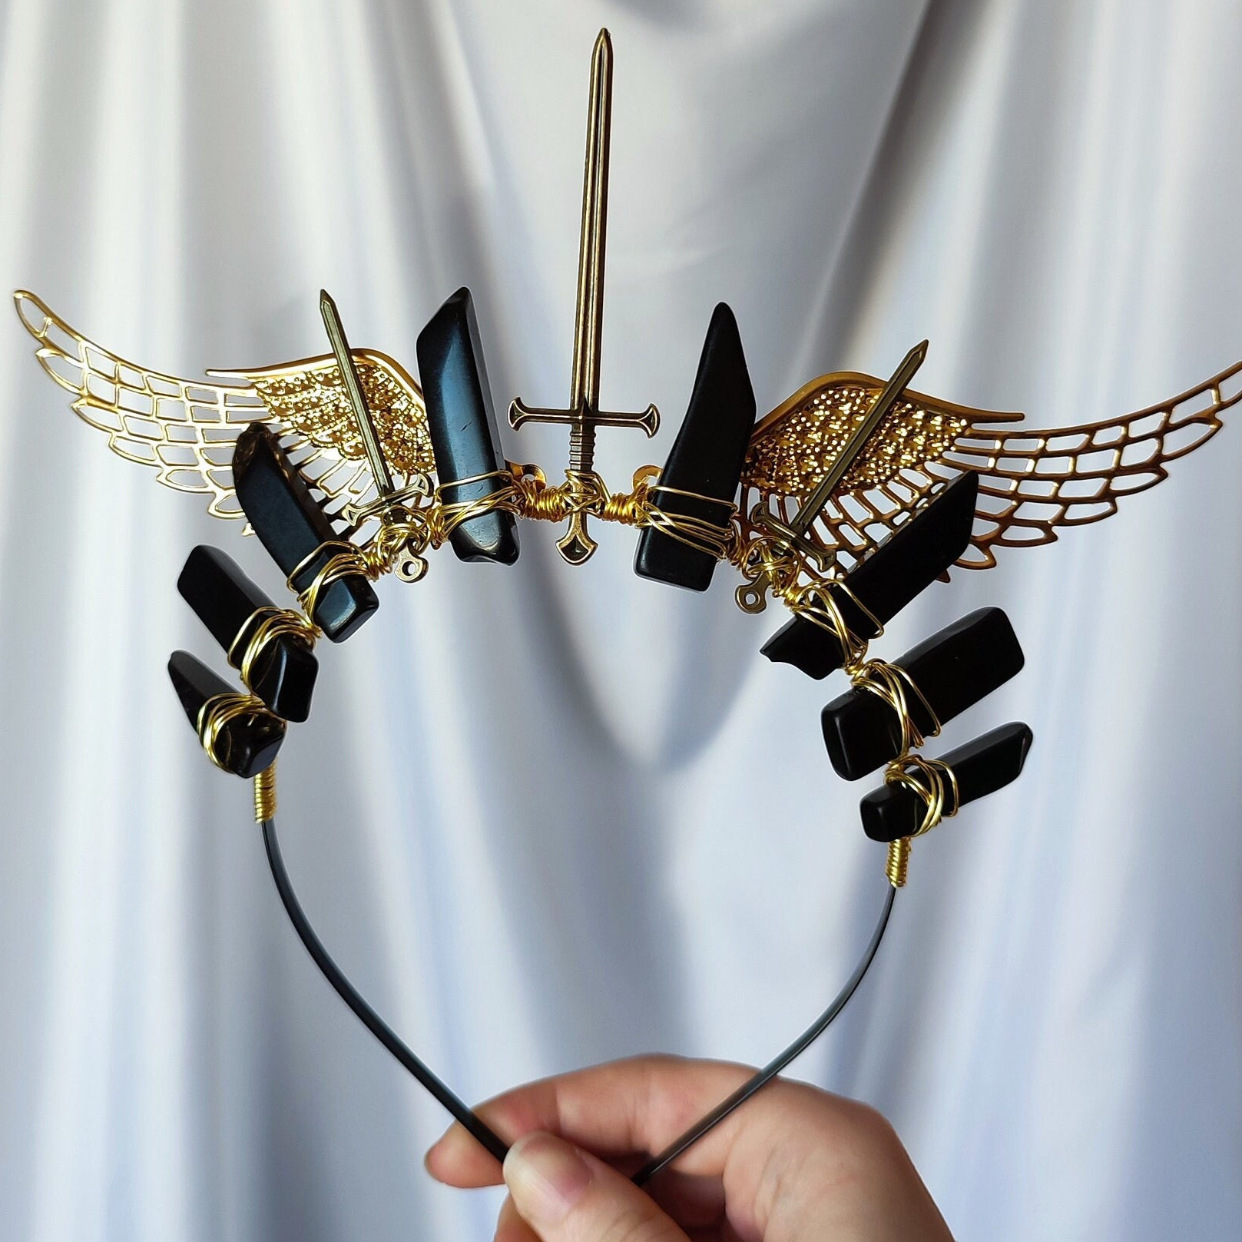 Black Agate Crystal Crown with Swords and Angel Wings